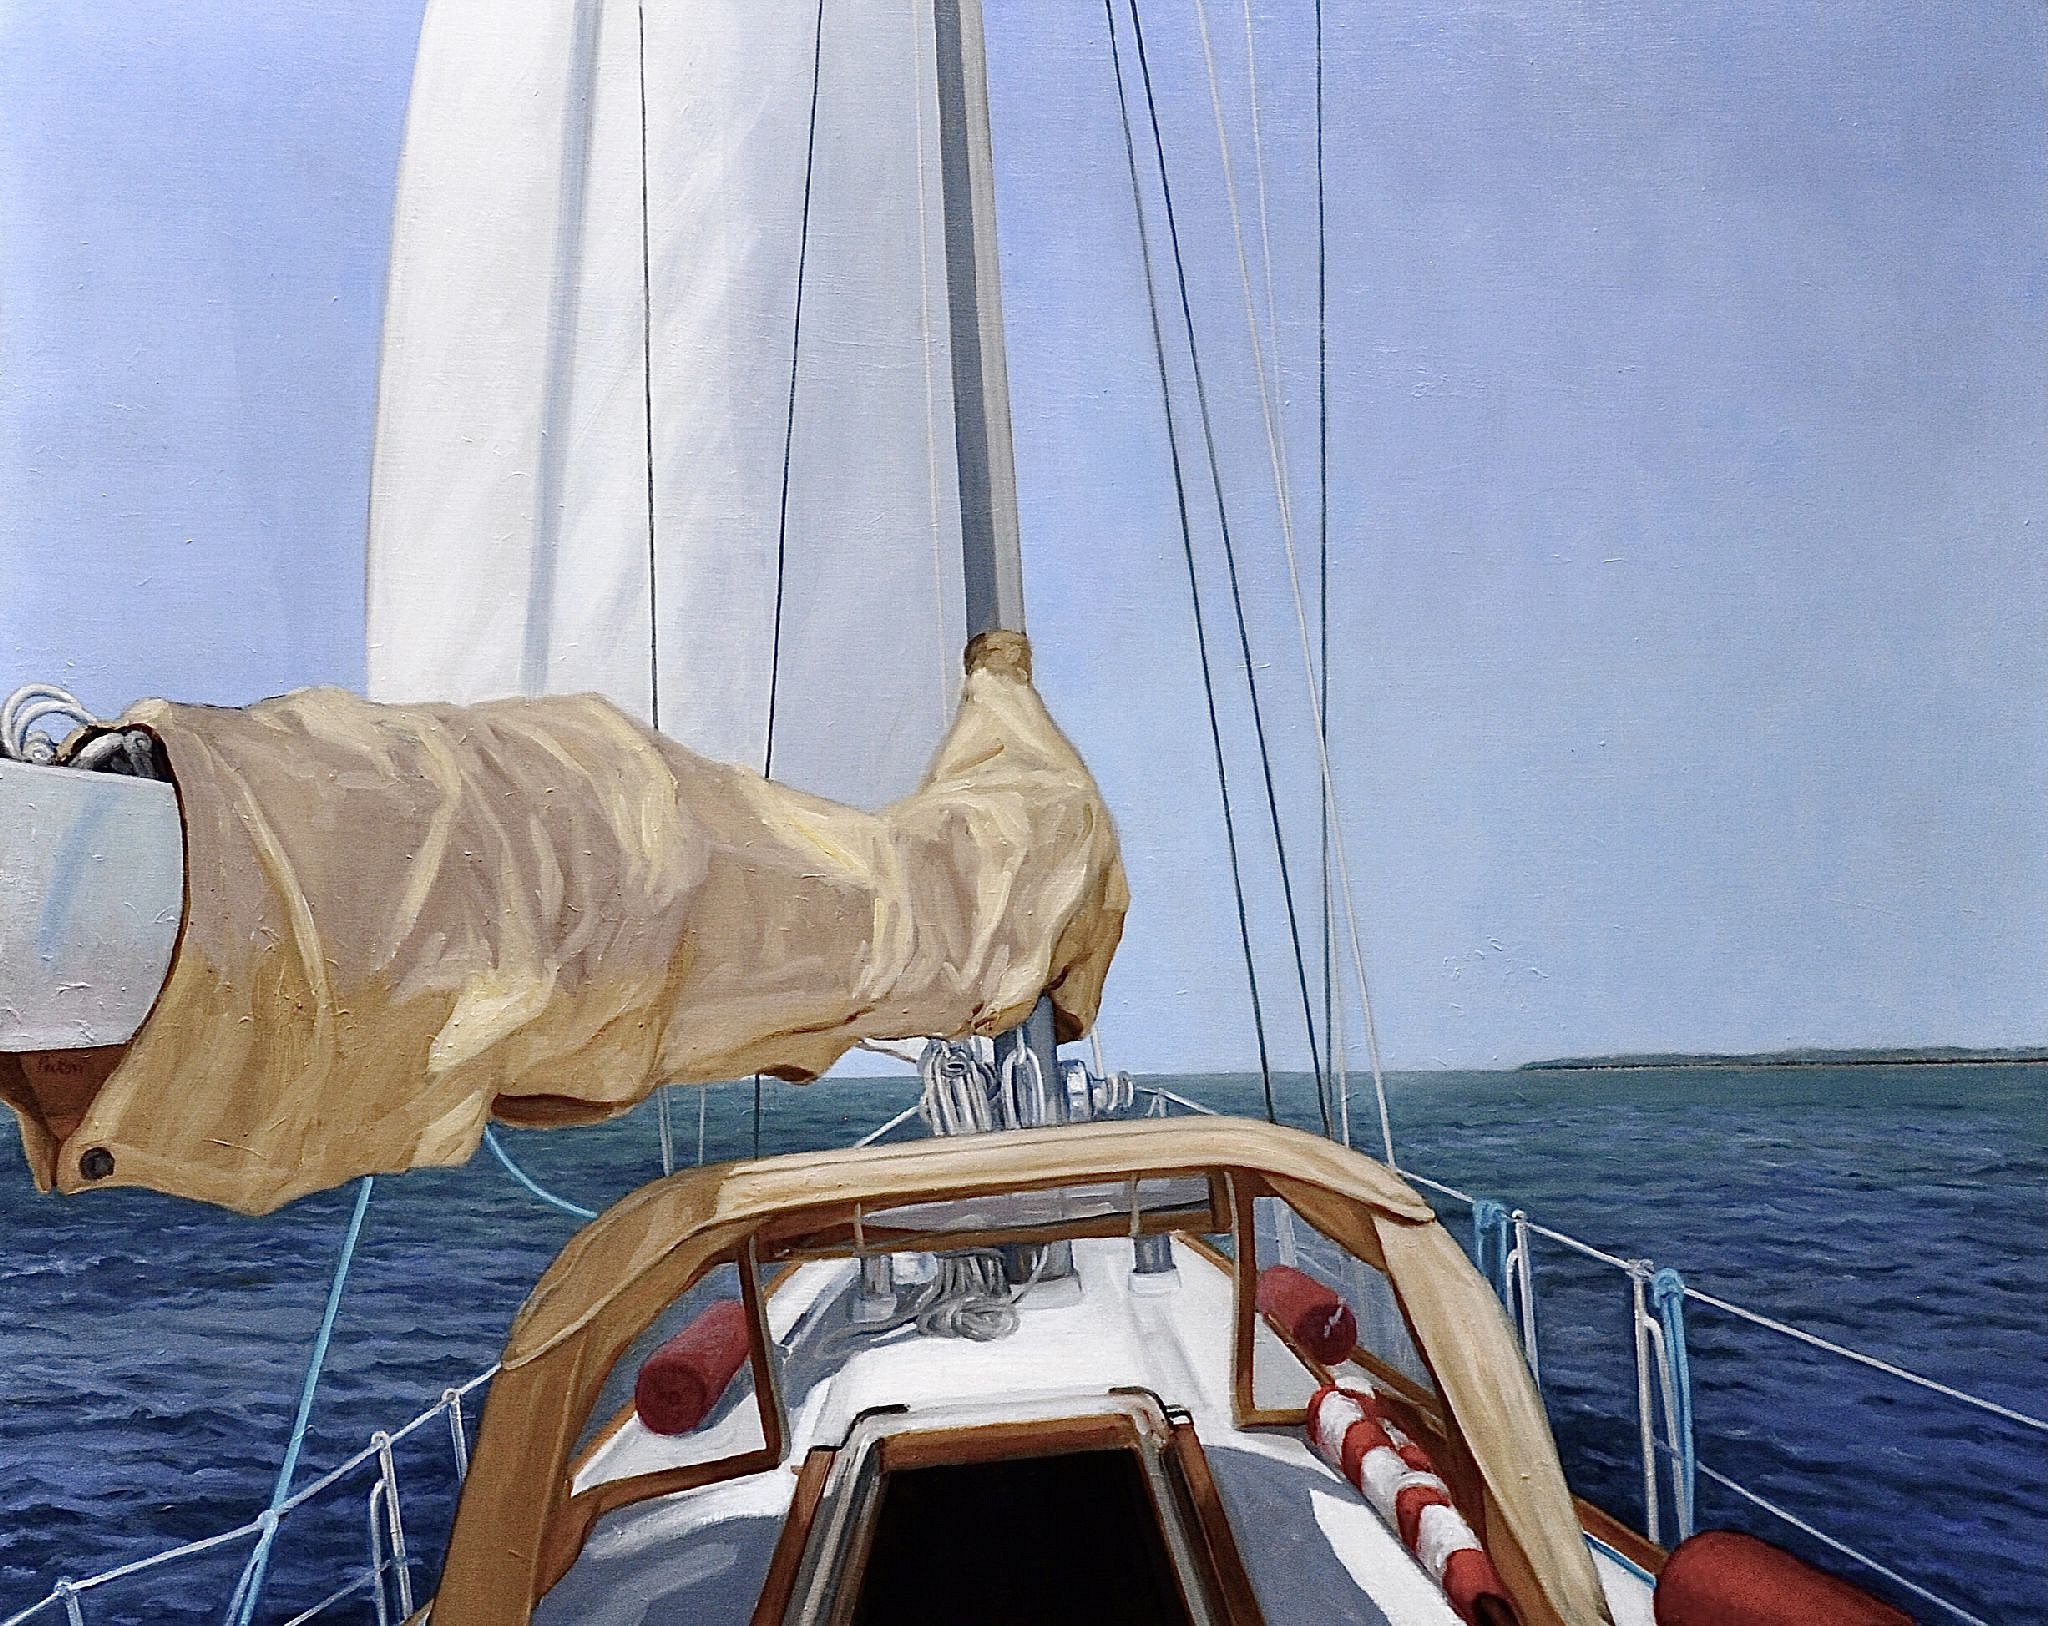 PRESS RELEASE: Down by the Sea: Paintings by David Peikon [Online Exclusive], Jul 11 - Jul 31, 2022